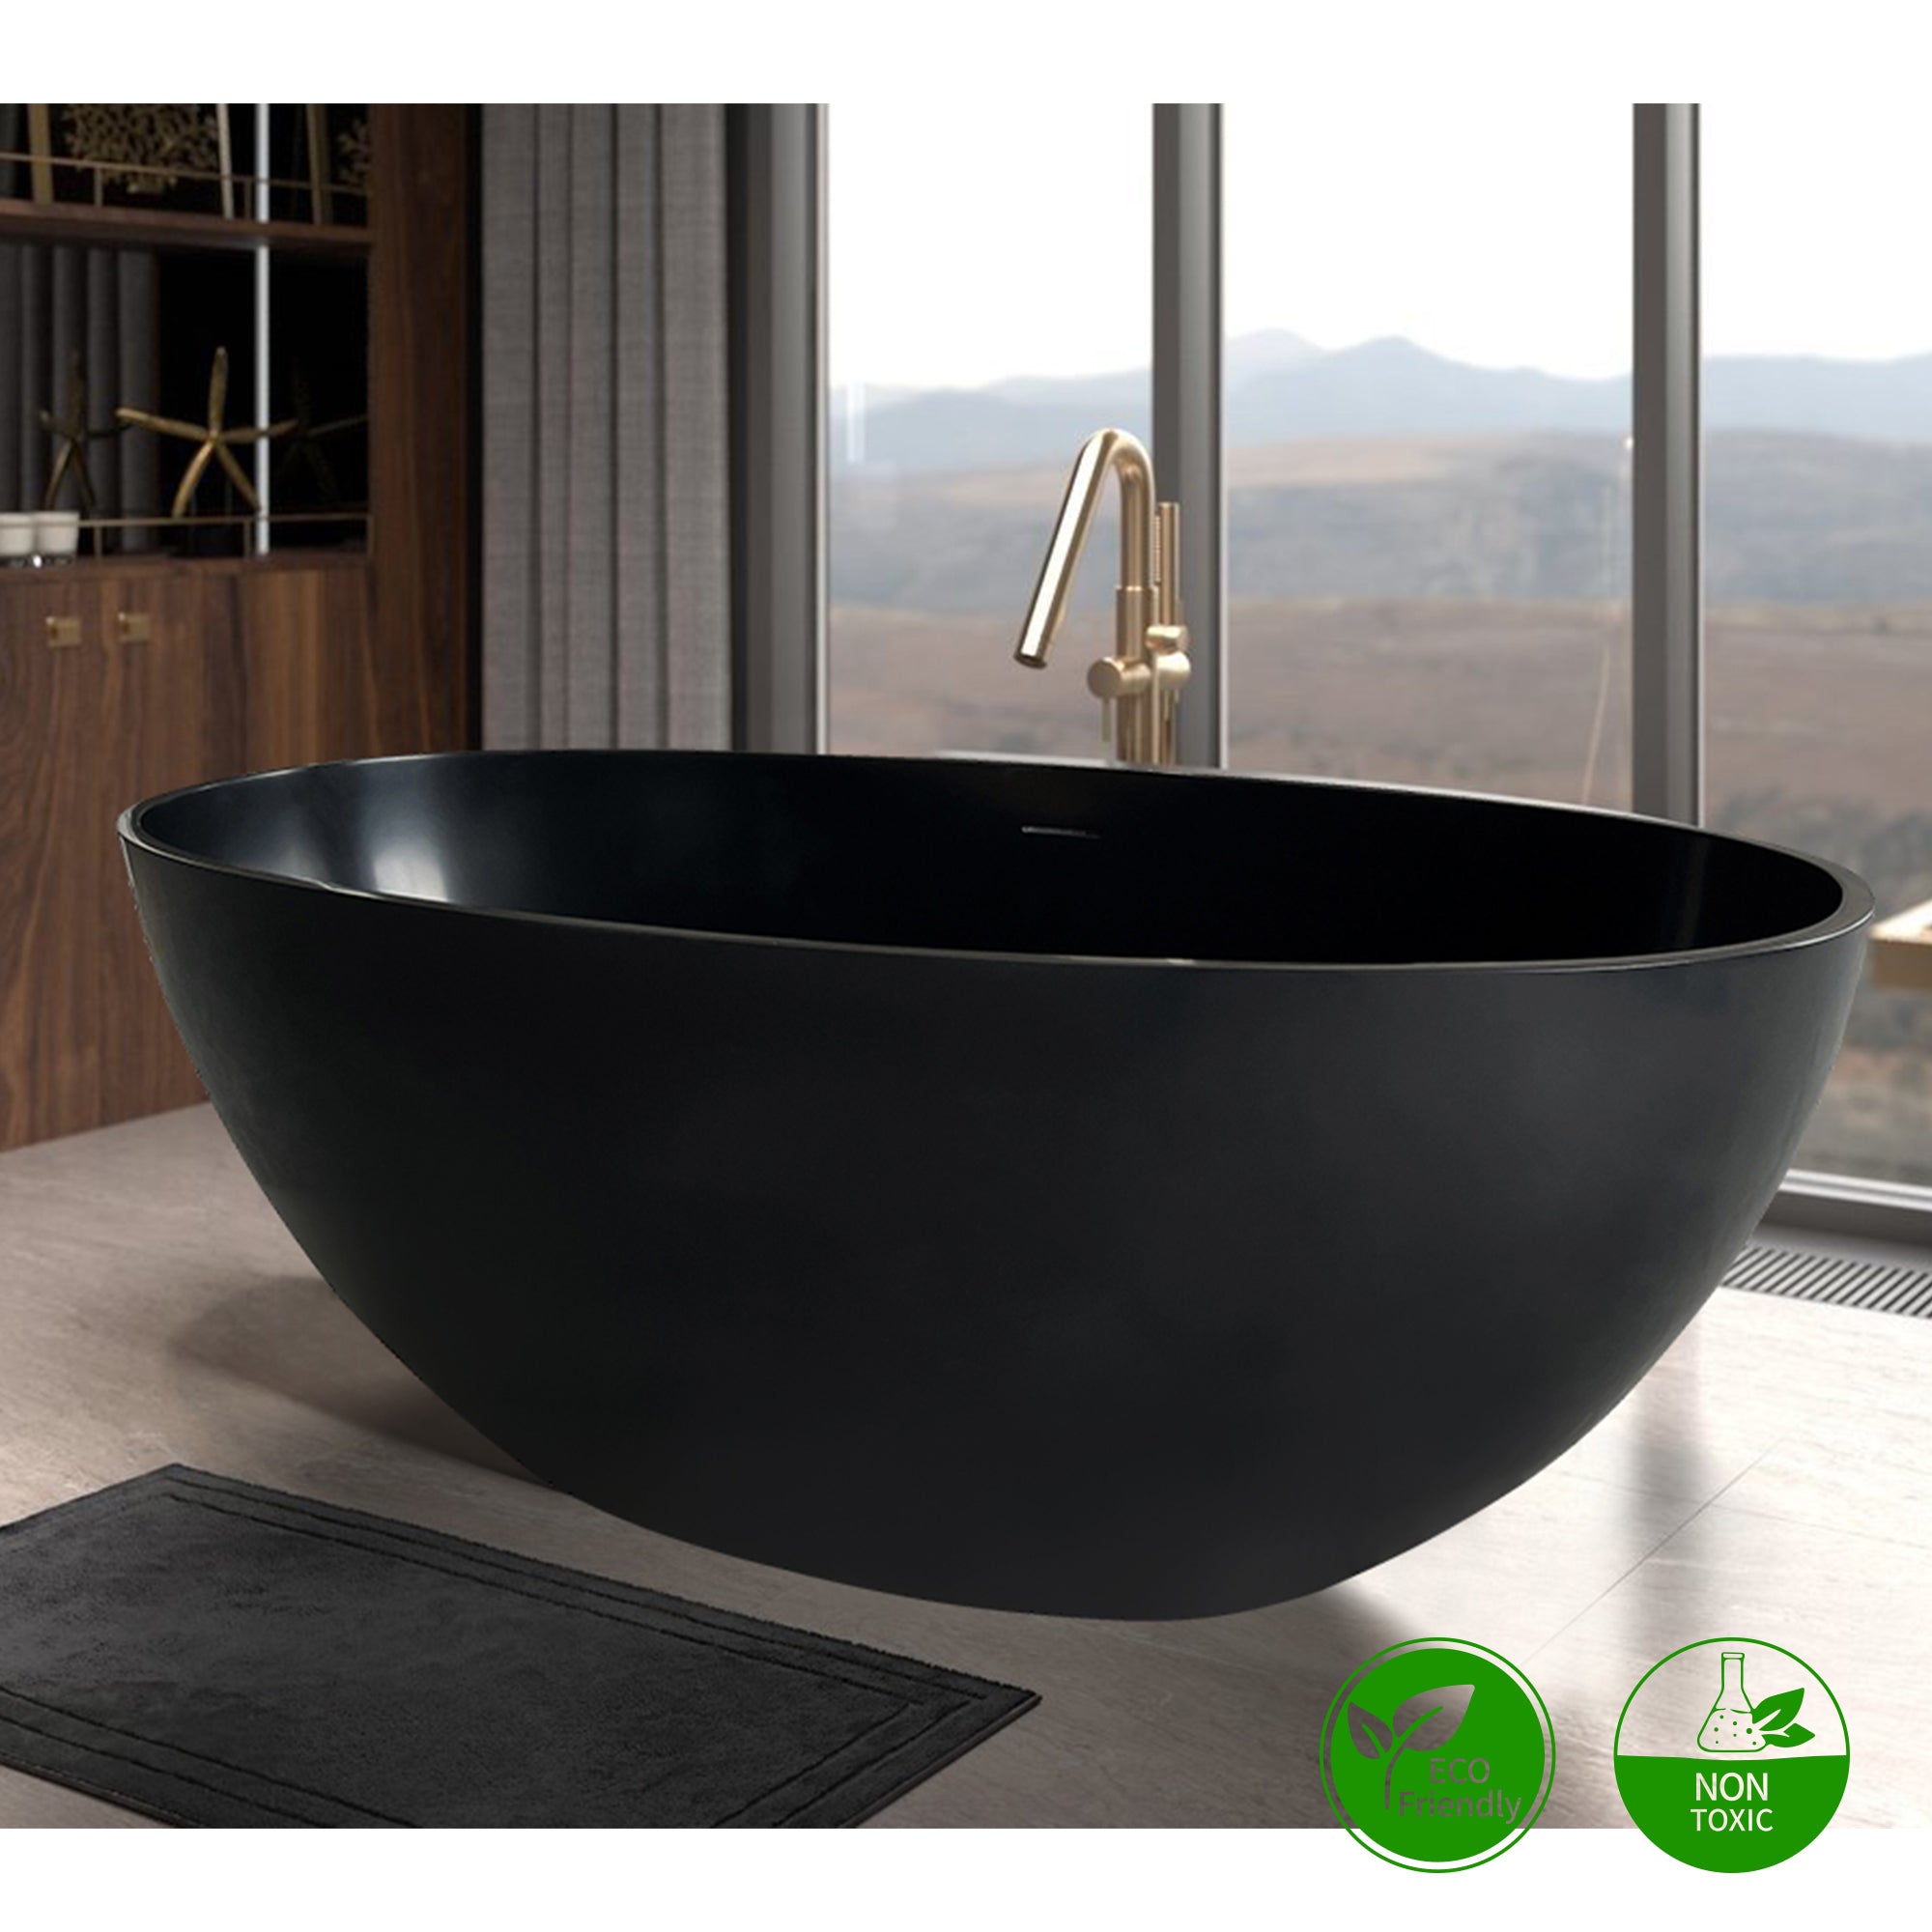 55" Oval Shaped Freestanding Solid Surface Soaking Bathtub with Overflow RX-S02-55MB